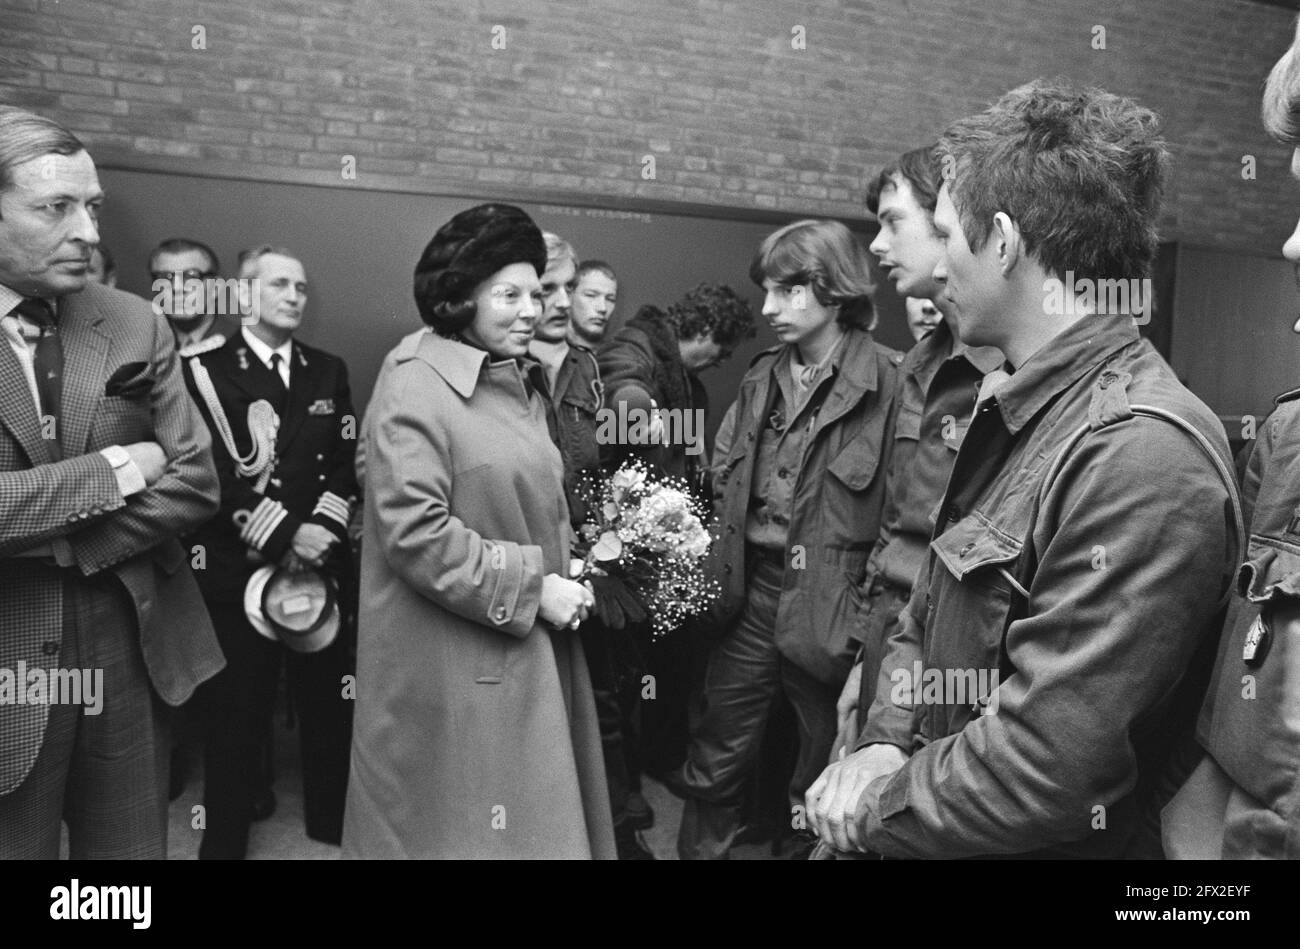 Princess Beatrix speaks with military, February 22, 1979, visits, barracks, royal family, military, The Netherlands, 20th century press agency photo, news to remember, documentary, historic photography 1945-1990, visual stories, human history of the Twentieth Century, capturing moments in time Stock Photo